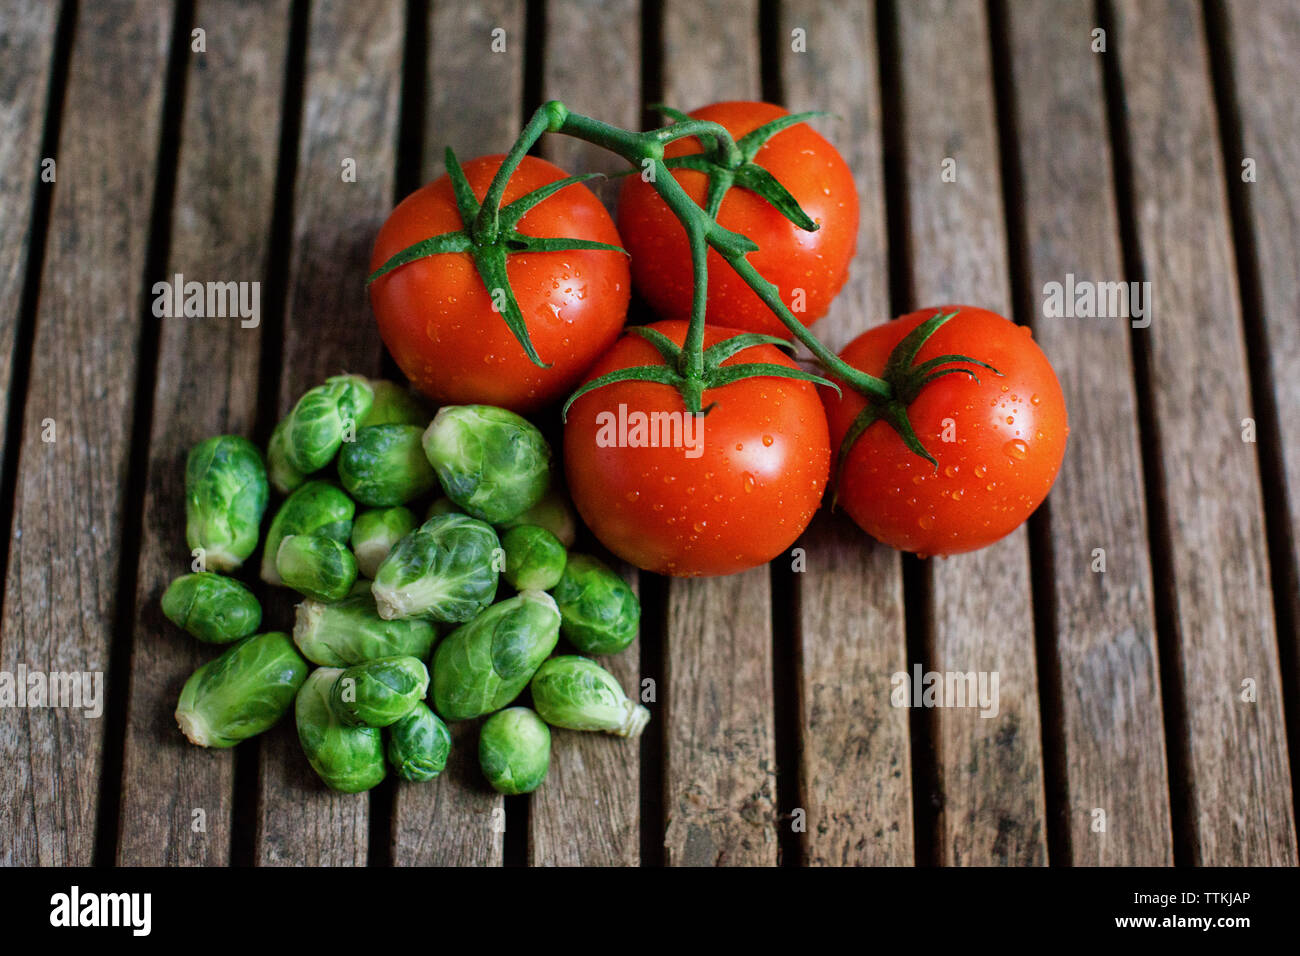 Overhead view of fresh tomatoes and small cabbages on wooden table Stock Photo